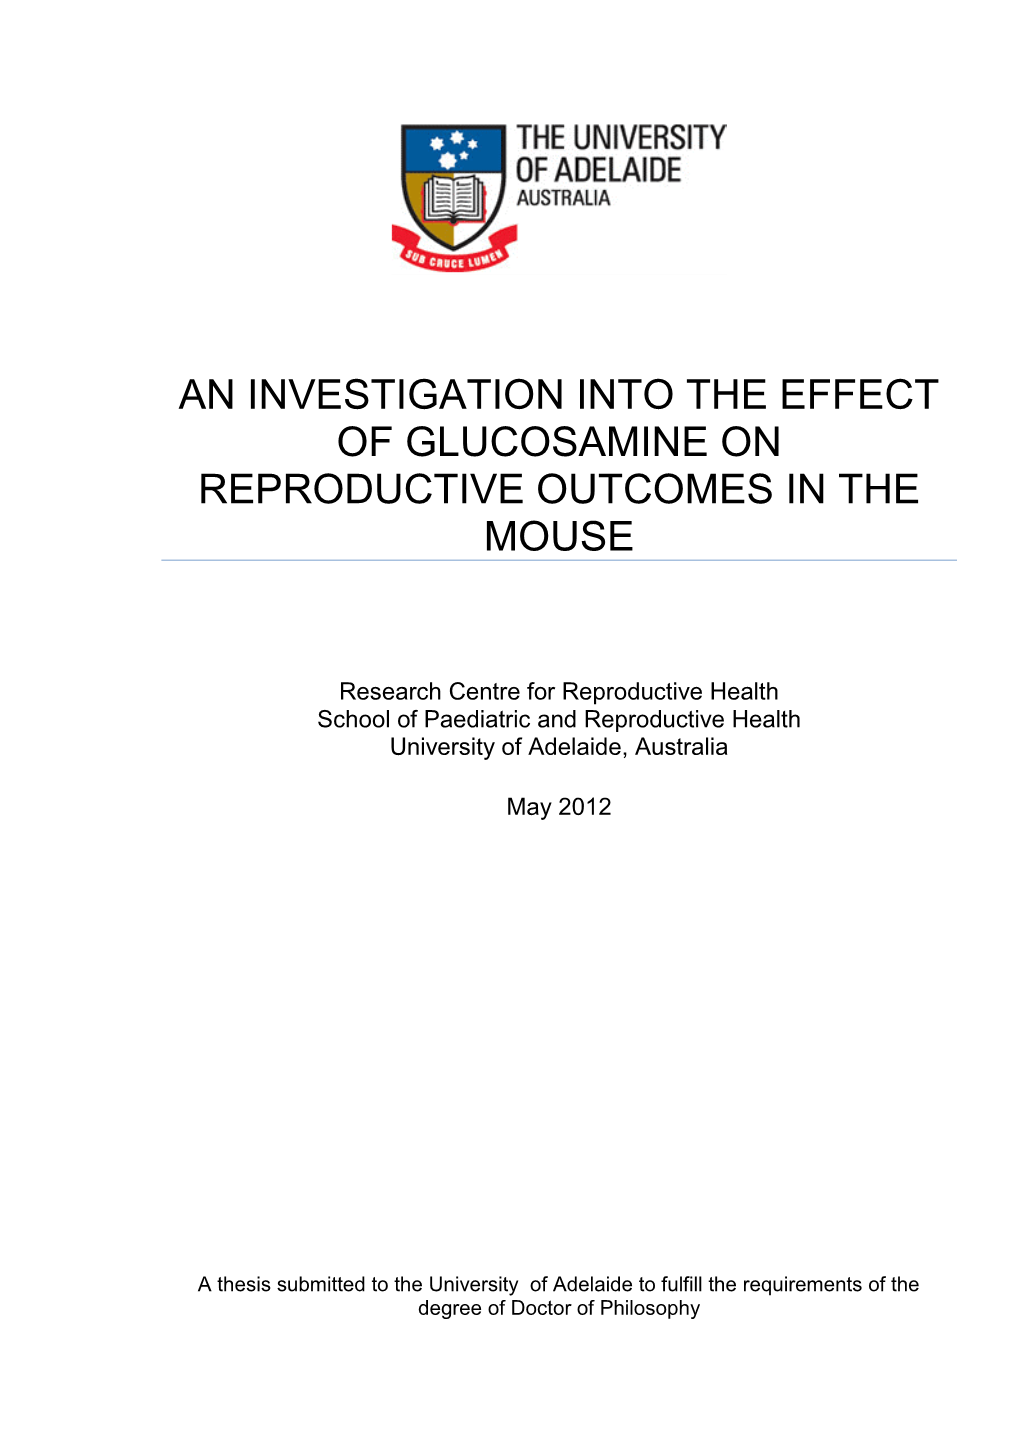 An Investigation Into the Effect of Glucosamine on Reproductive Outcomes in the Mouse